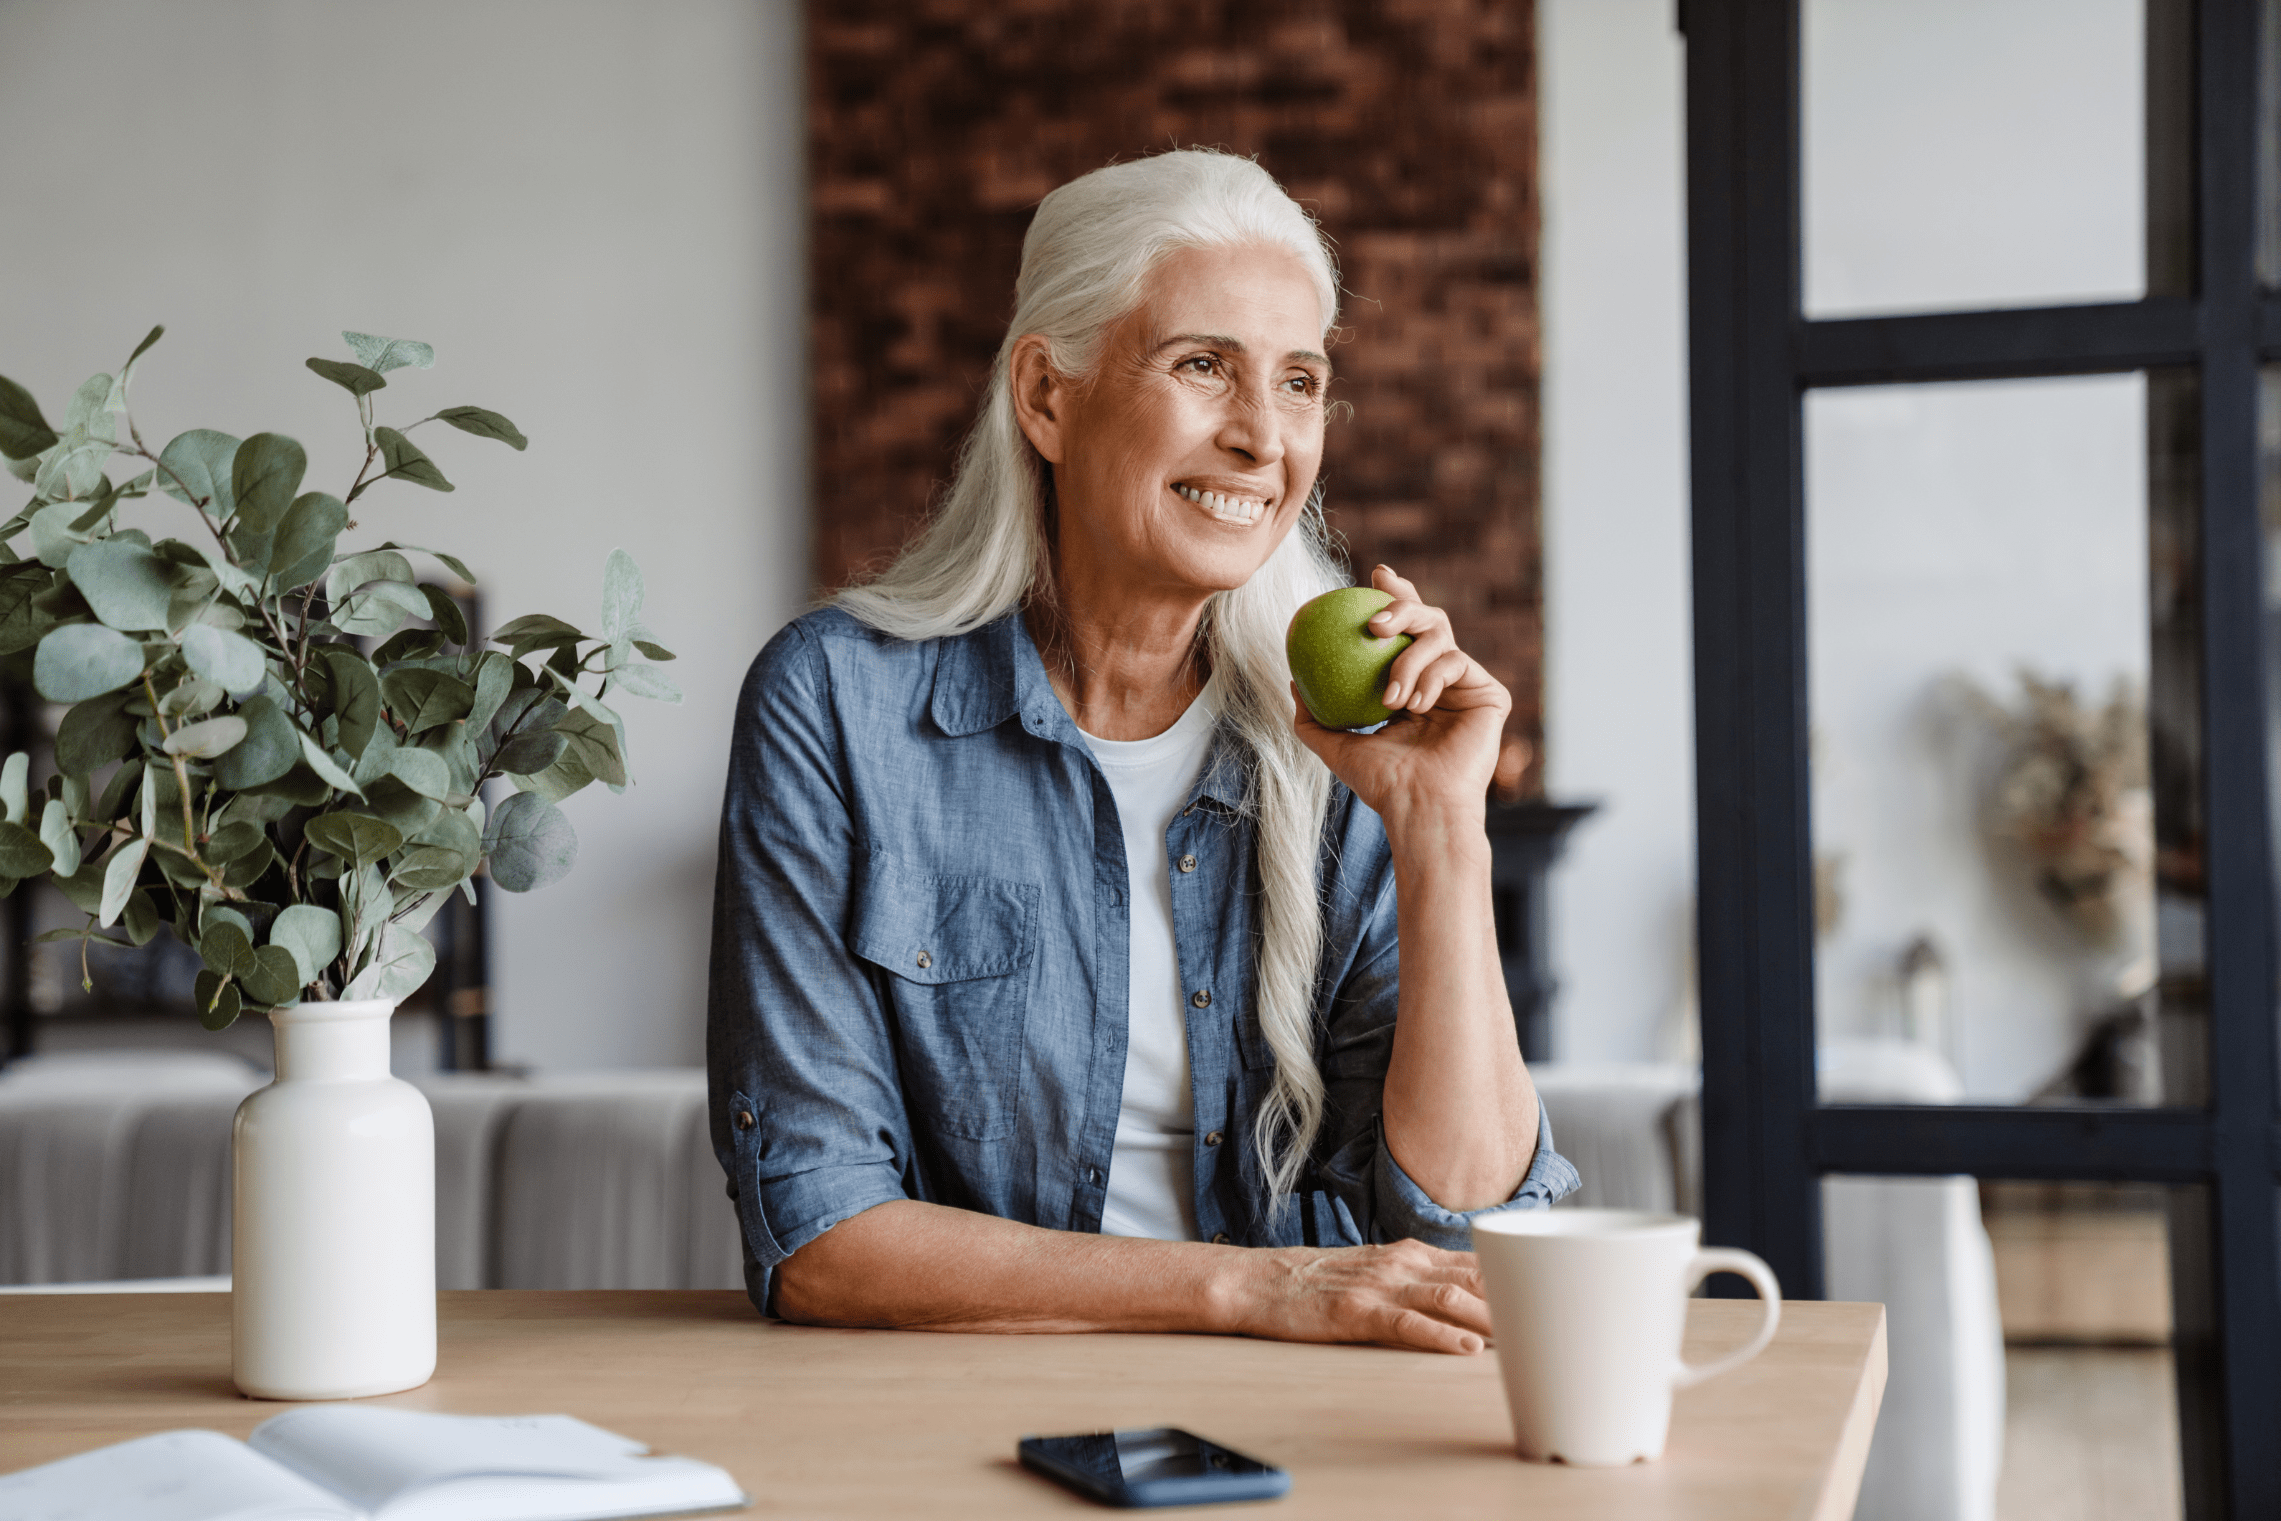 an image of a alc senior woman eating a green apple.